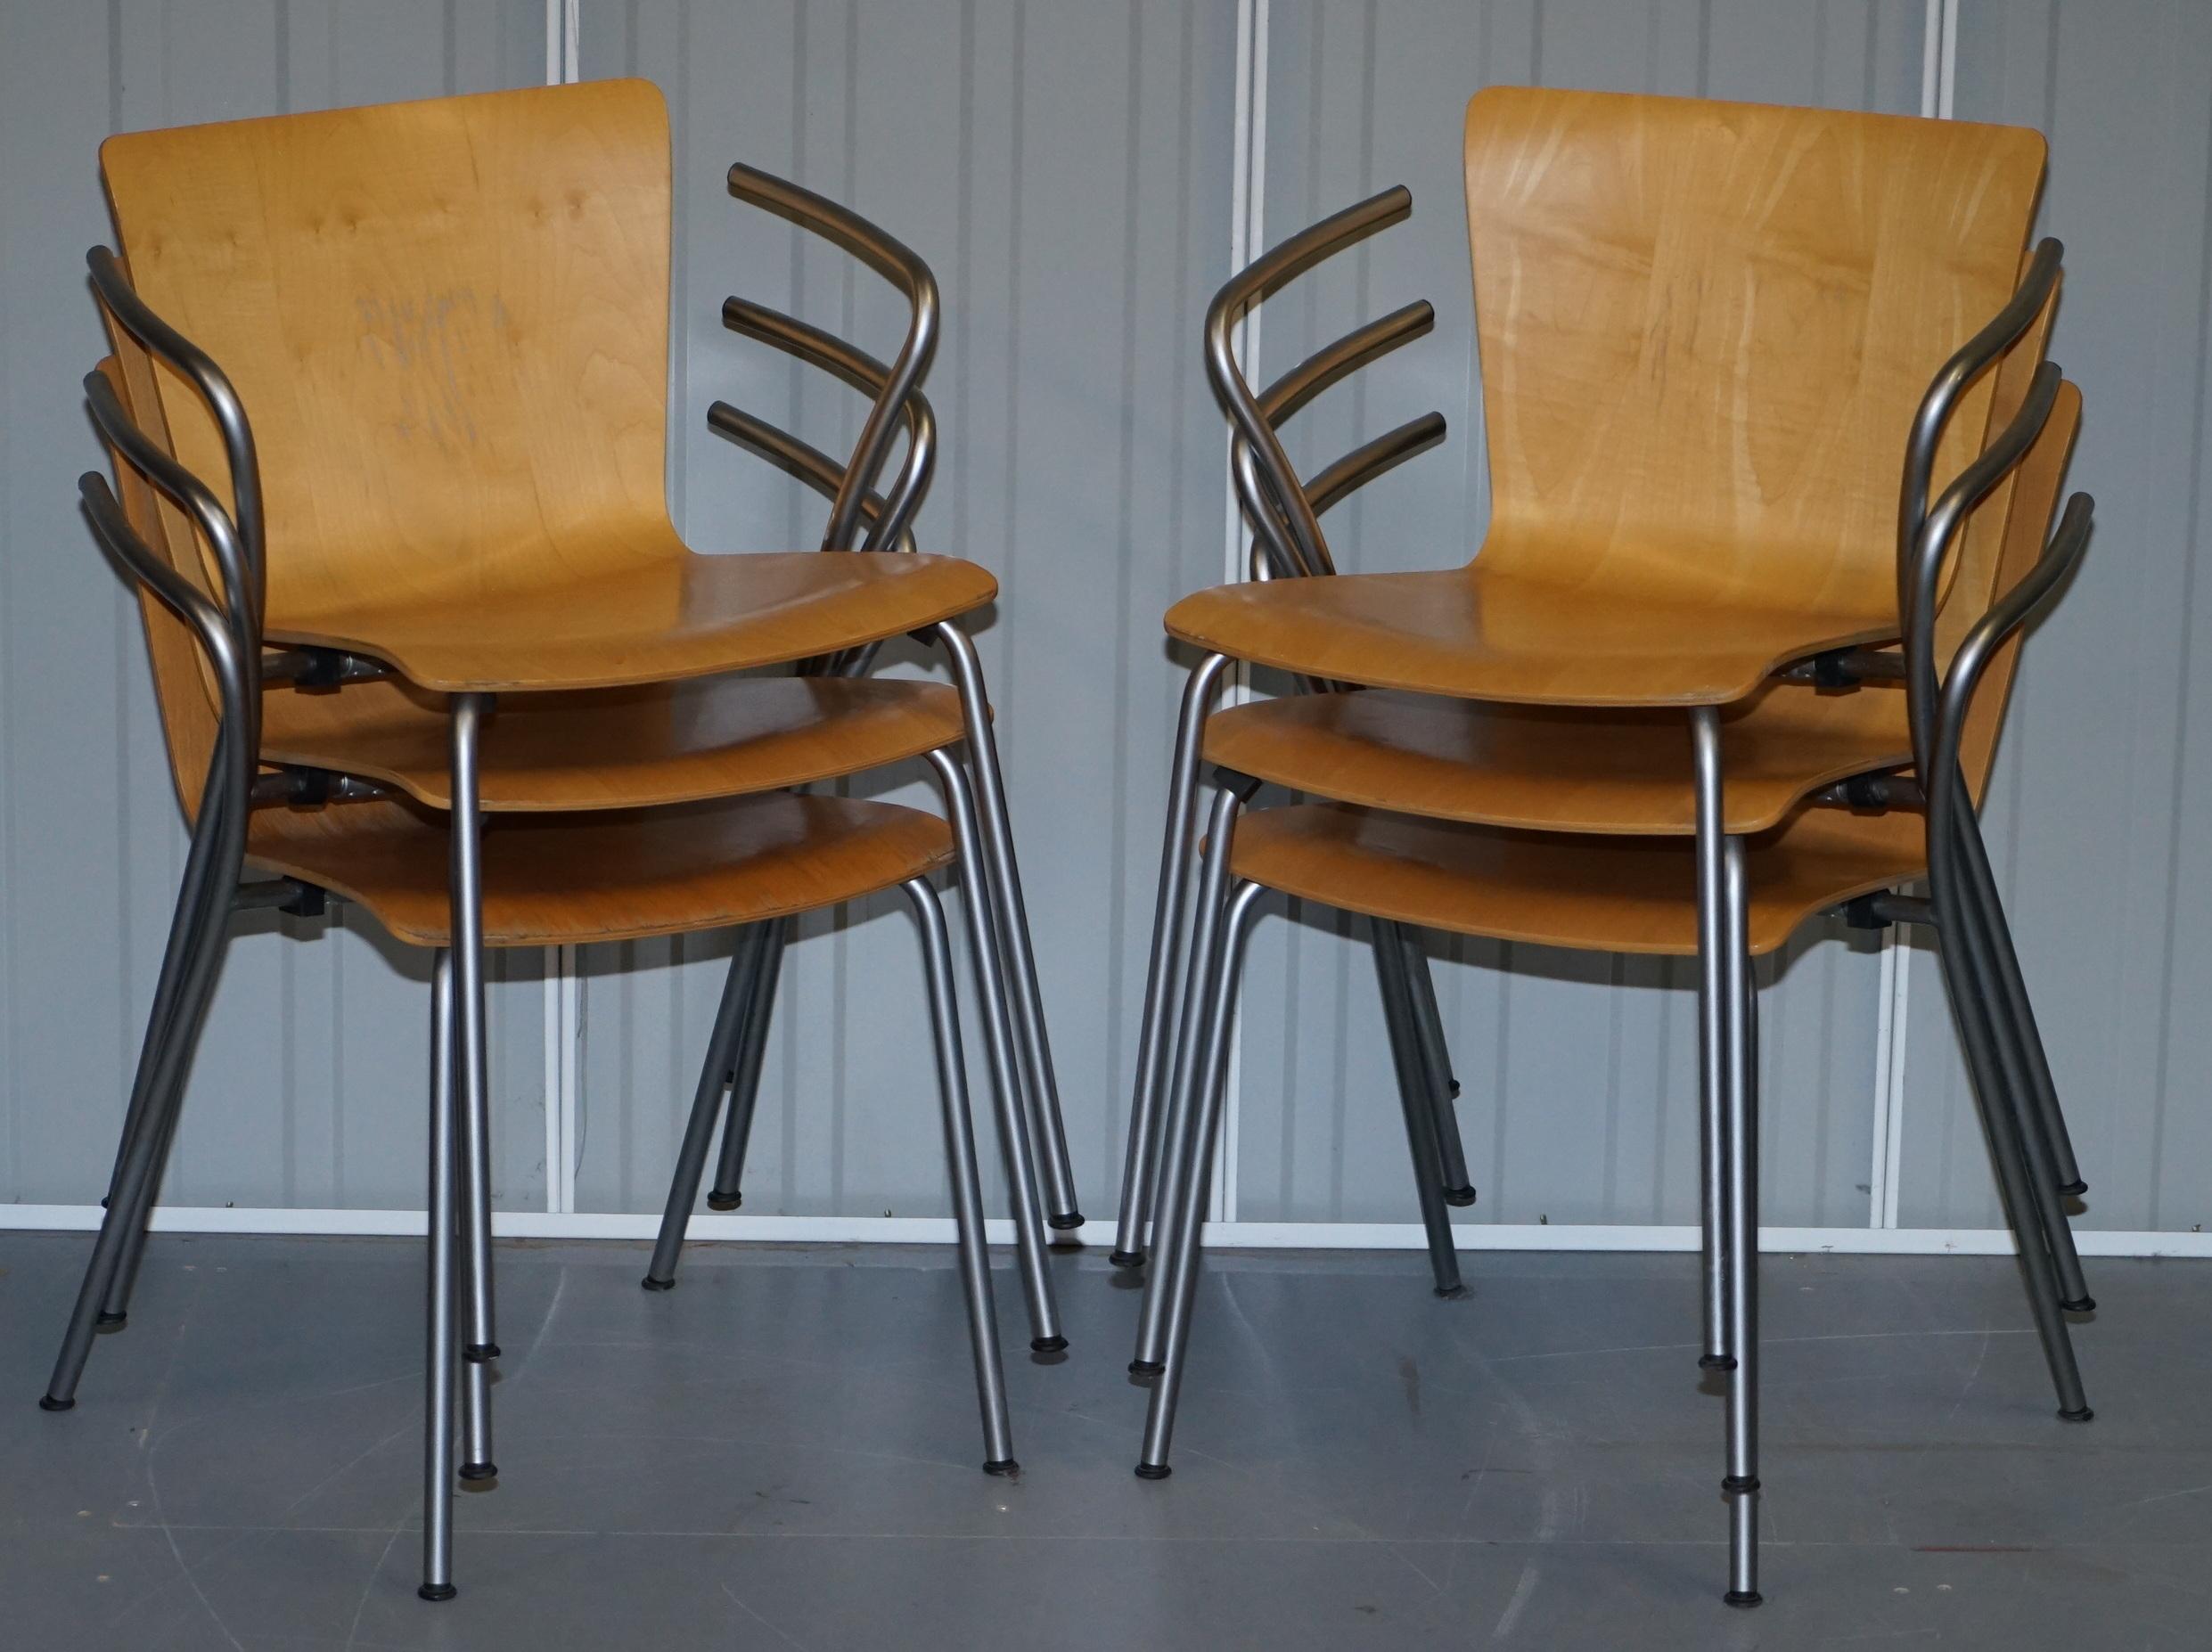 We are delighted to offer for sale this lovely set of six vintage Fritz Hansen Vico Magistretti Due bentwood stacking armchairs

An iconic set of high designer stacking armchairs by the absolute creative genius’s at Fritz Hansen. Each chair is